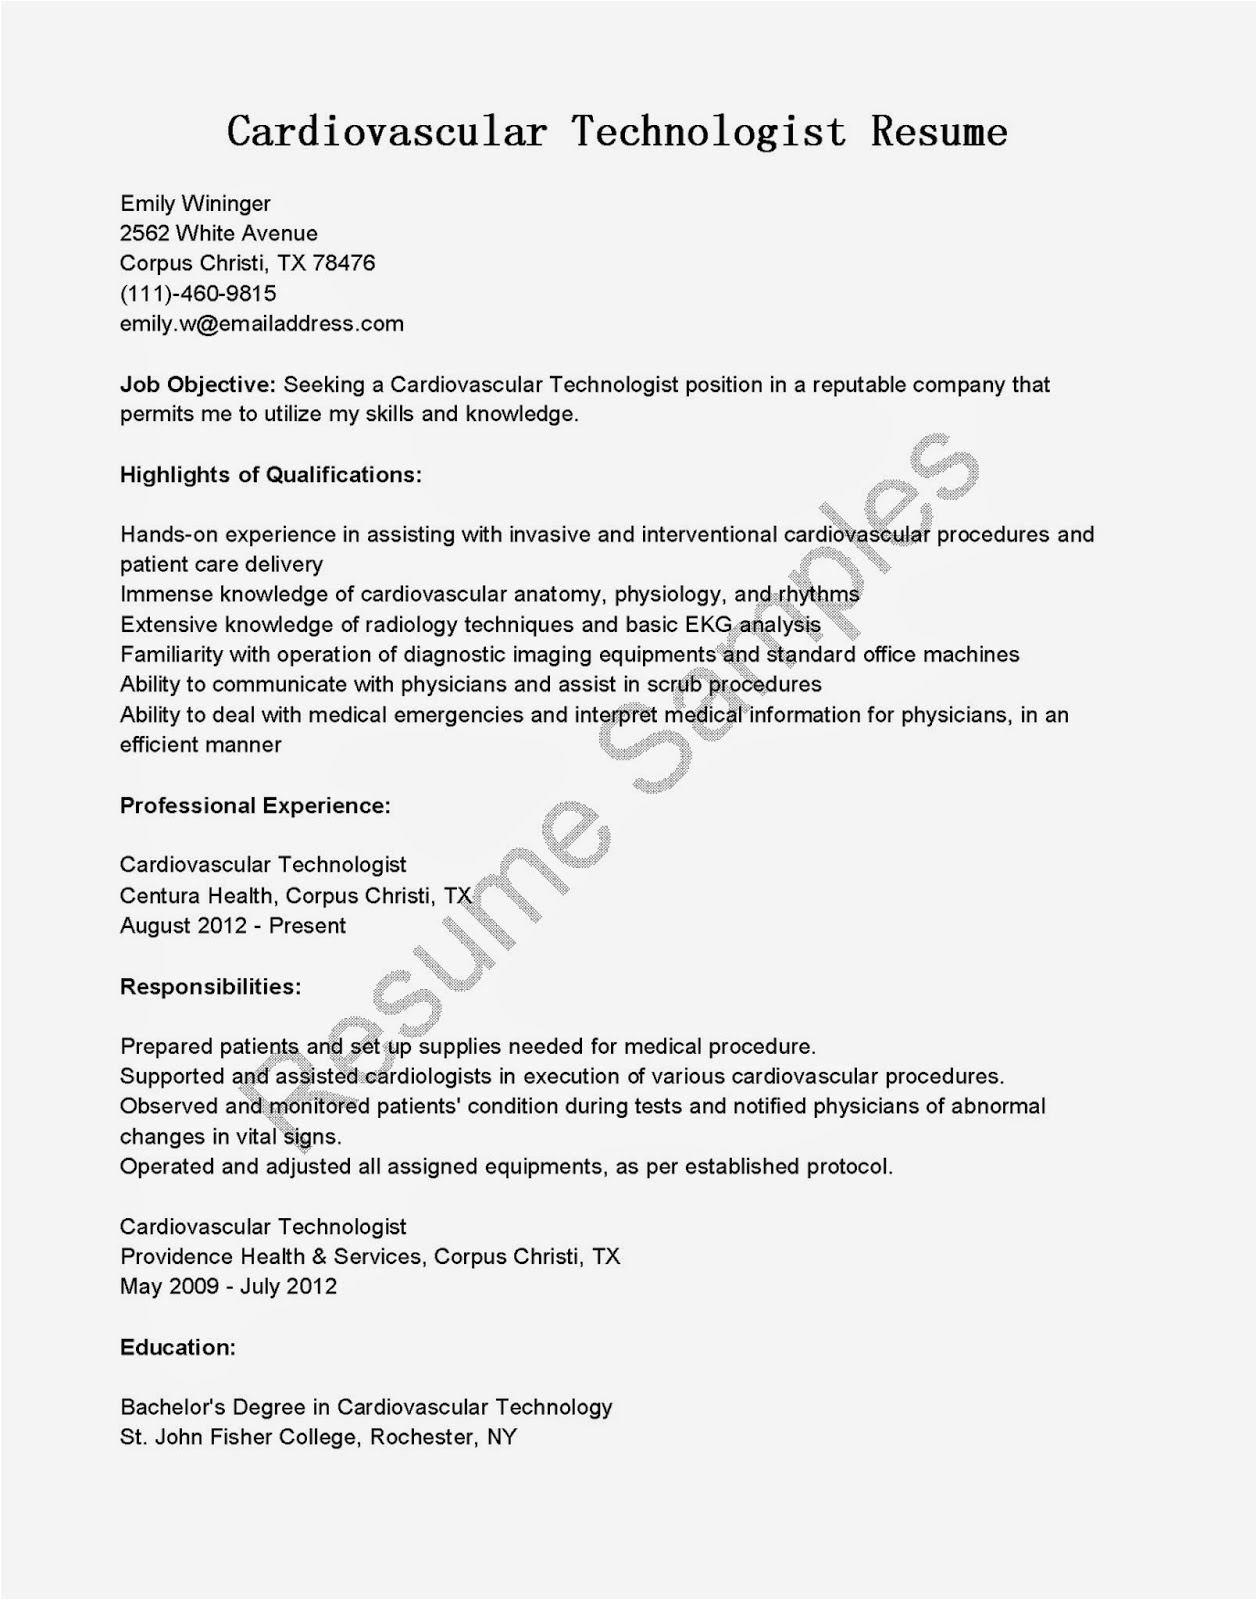 Fisher College Of Business Resume Template Resume Samples Cardiovascular Technologist Resume Sample